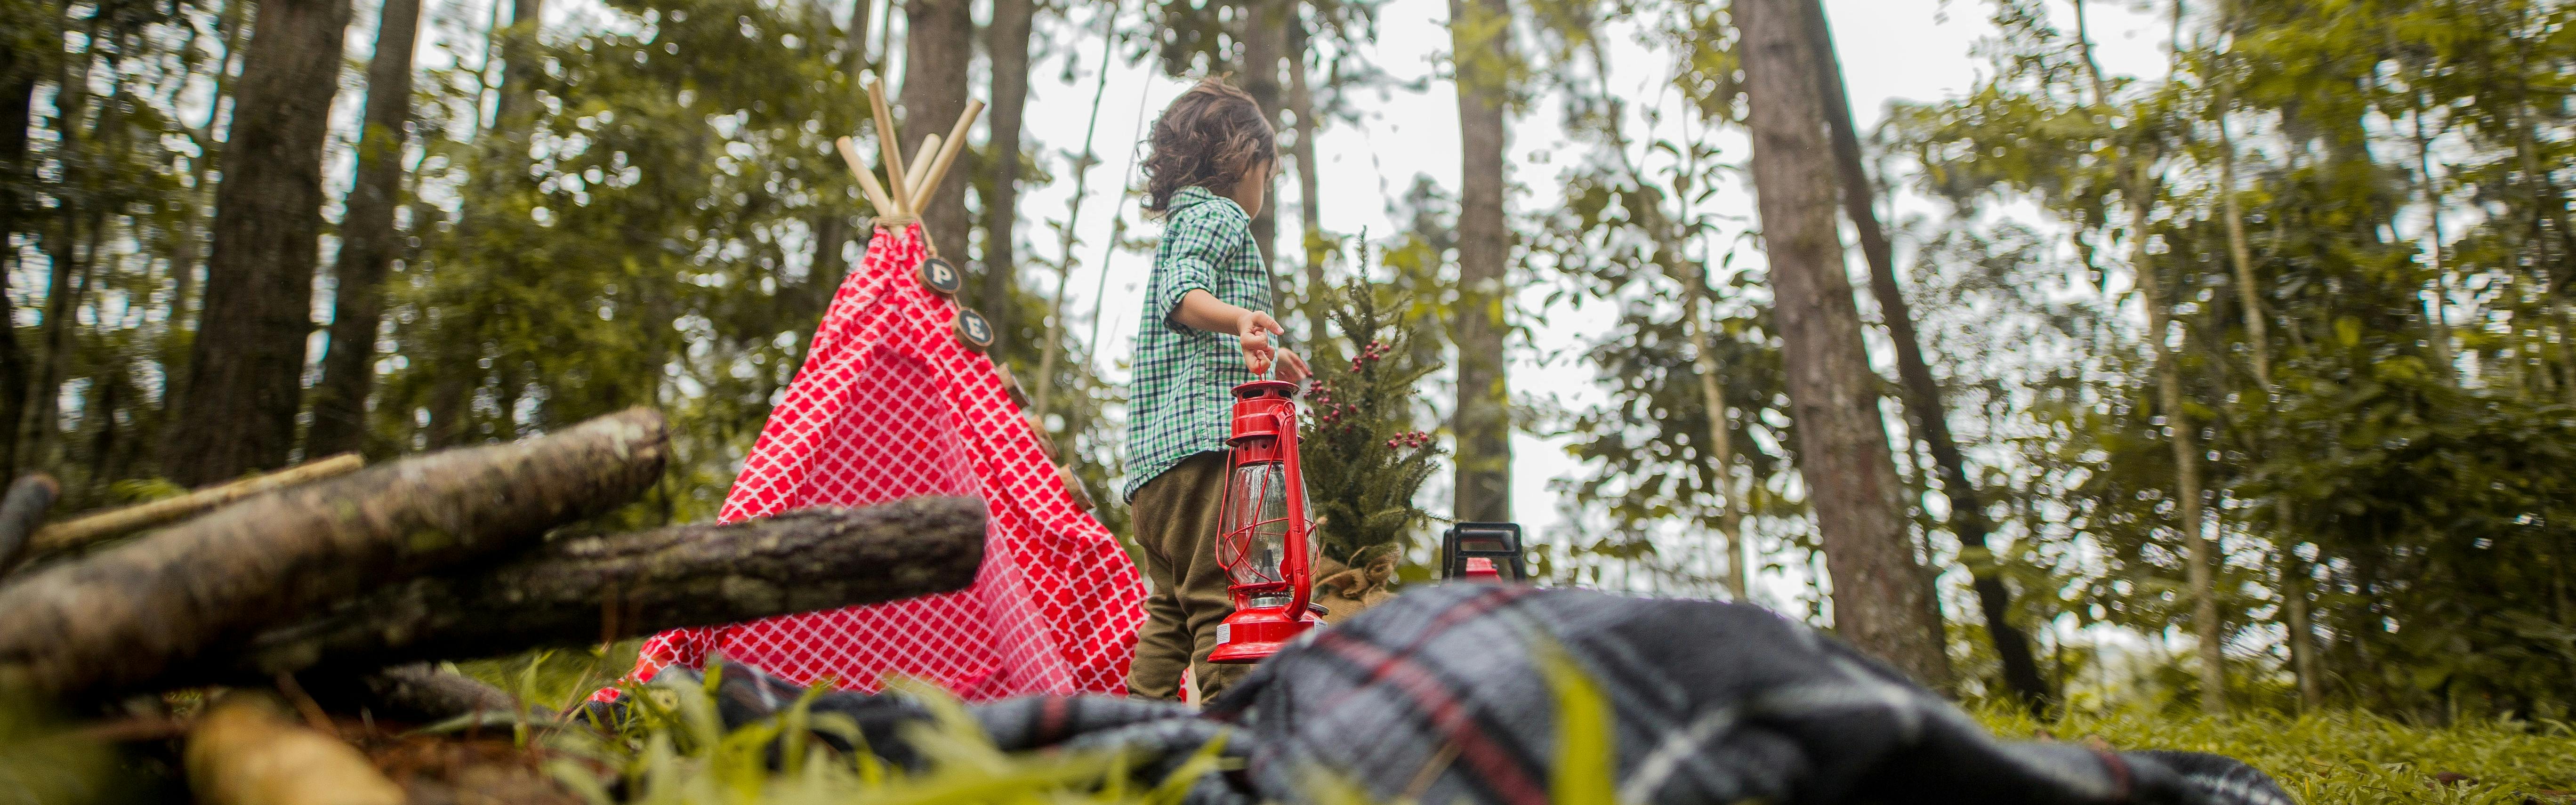 A toddler in a plaid shirt carries a red lantern and stands next to a small red teepee-style tent in a forest